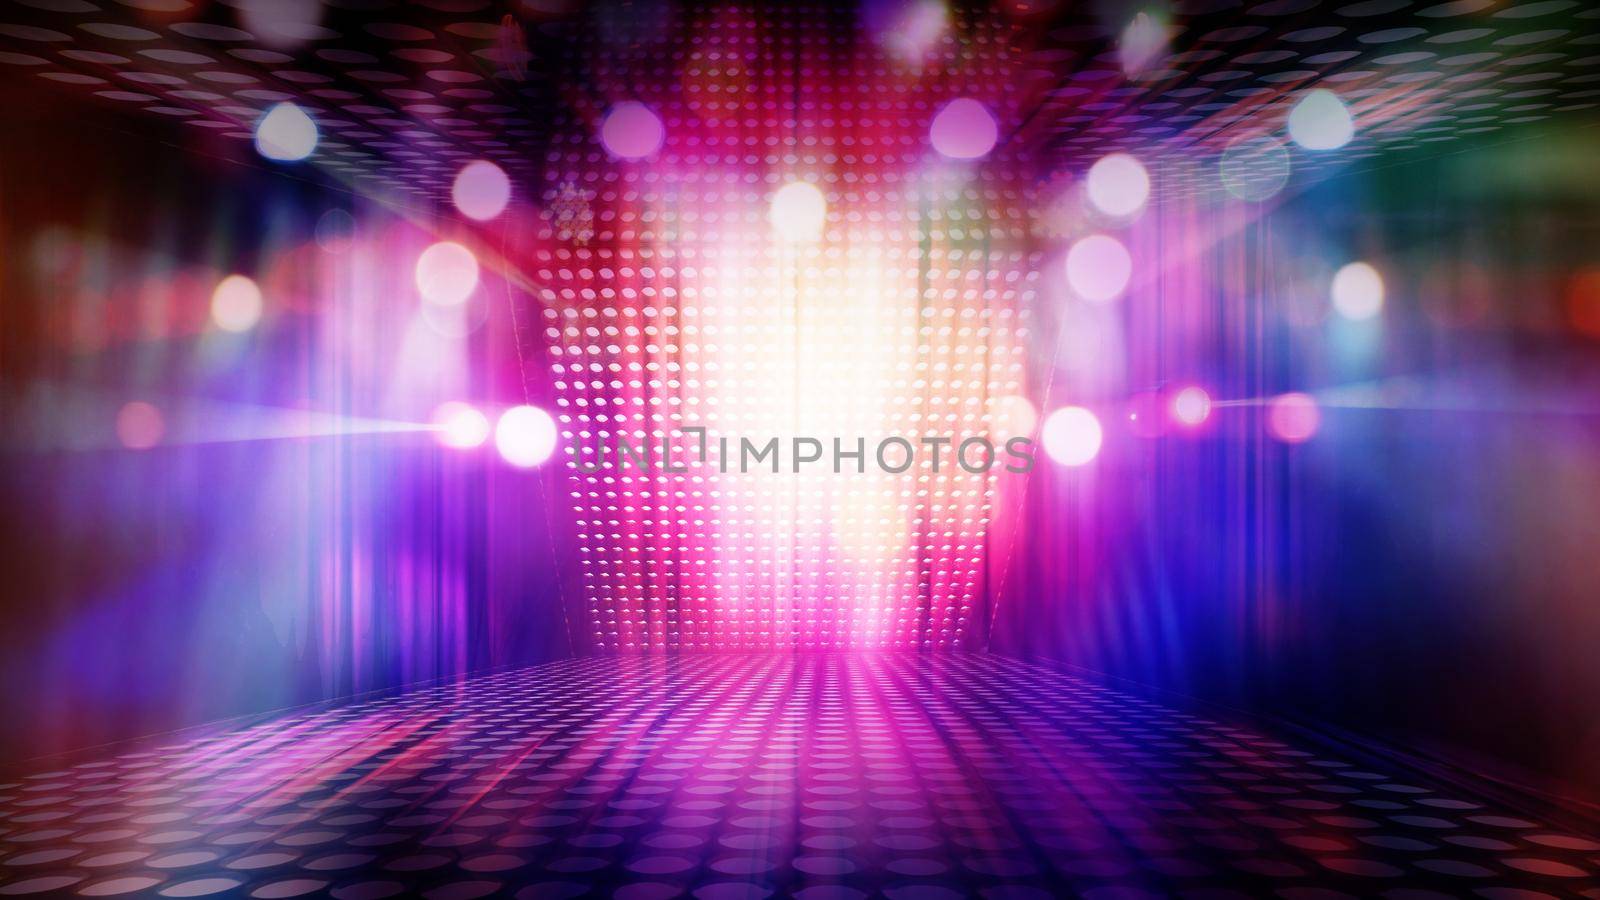 blurred empty theater stage with fun colourful spotlights, abstract image of concert lighting illumination background by jatmikaV